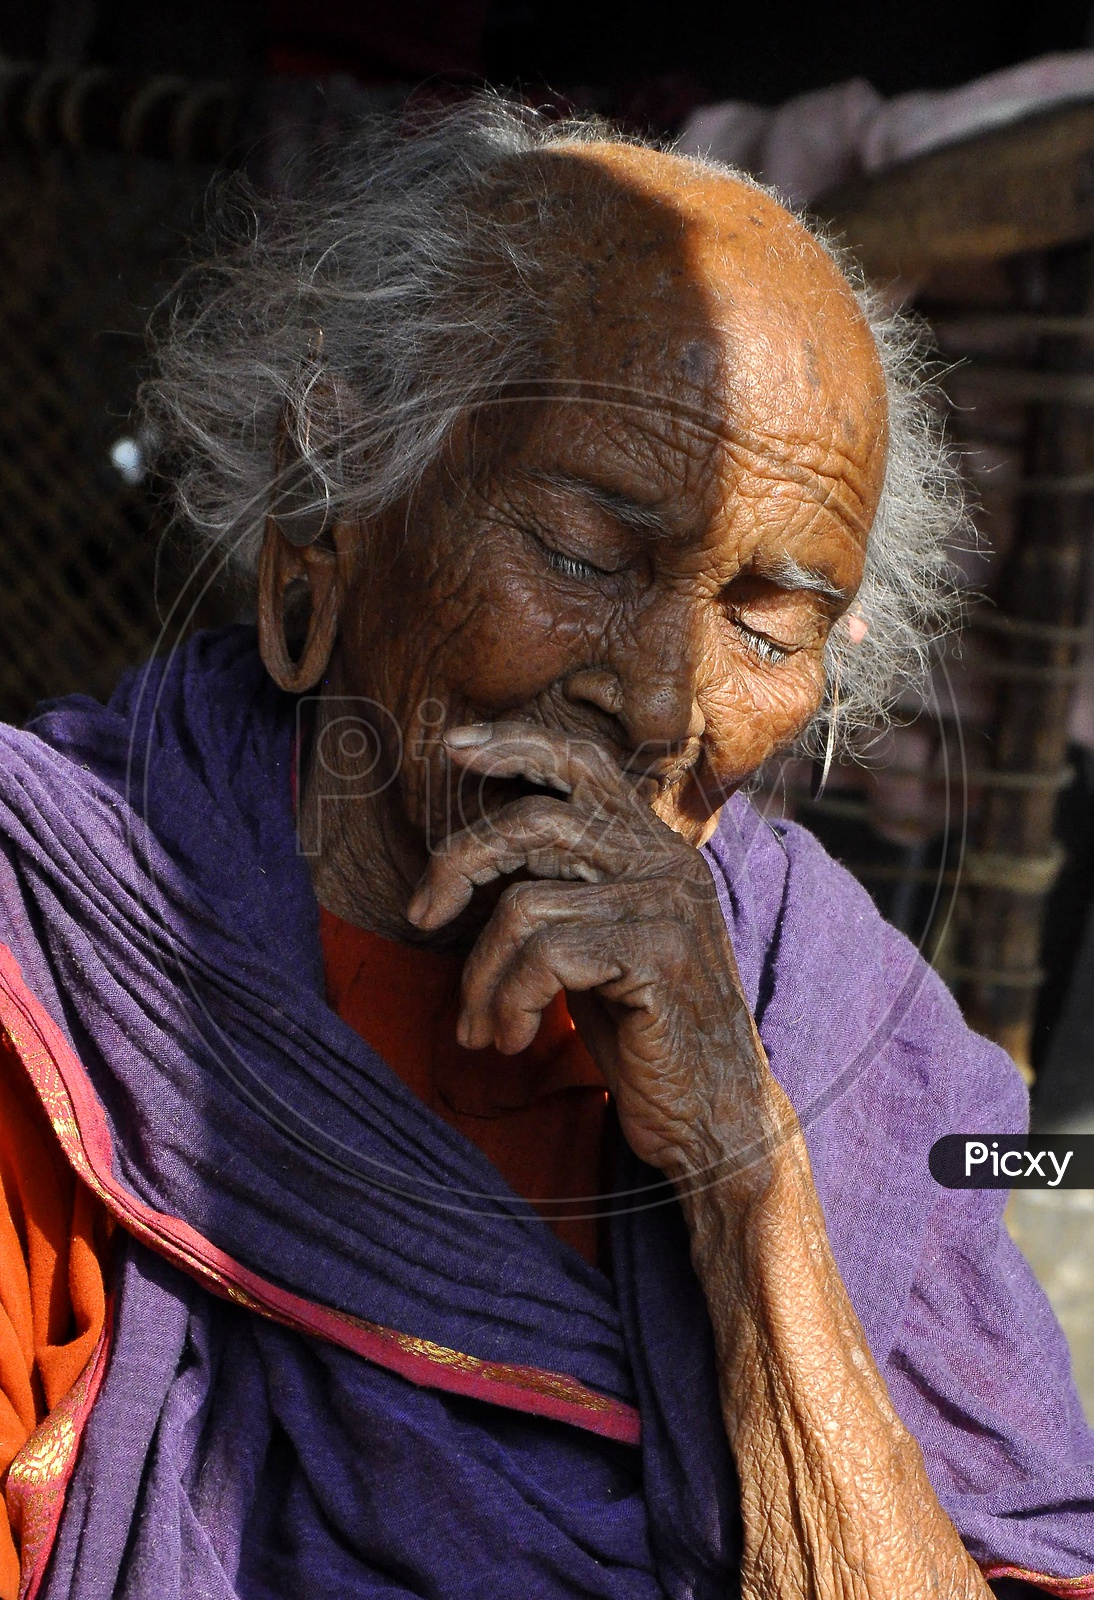 The old woman of Mathura tribe